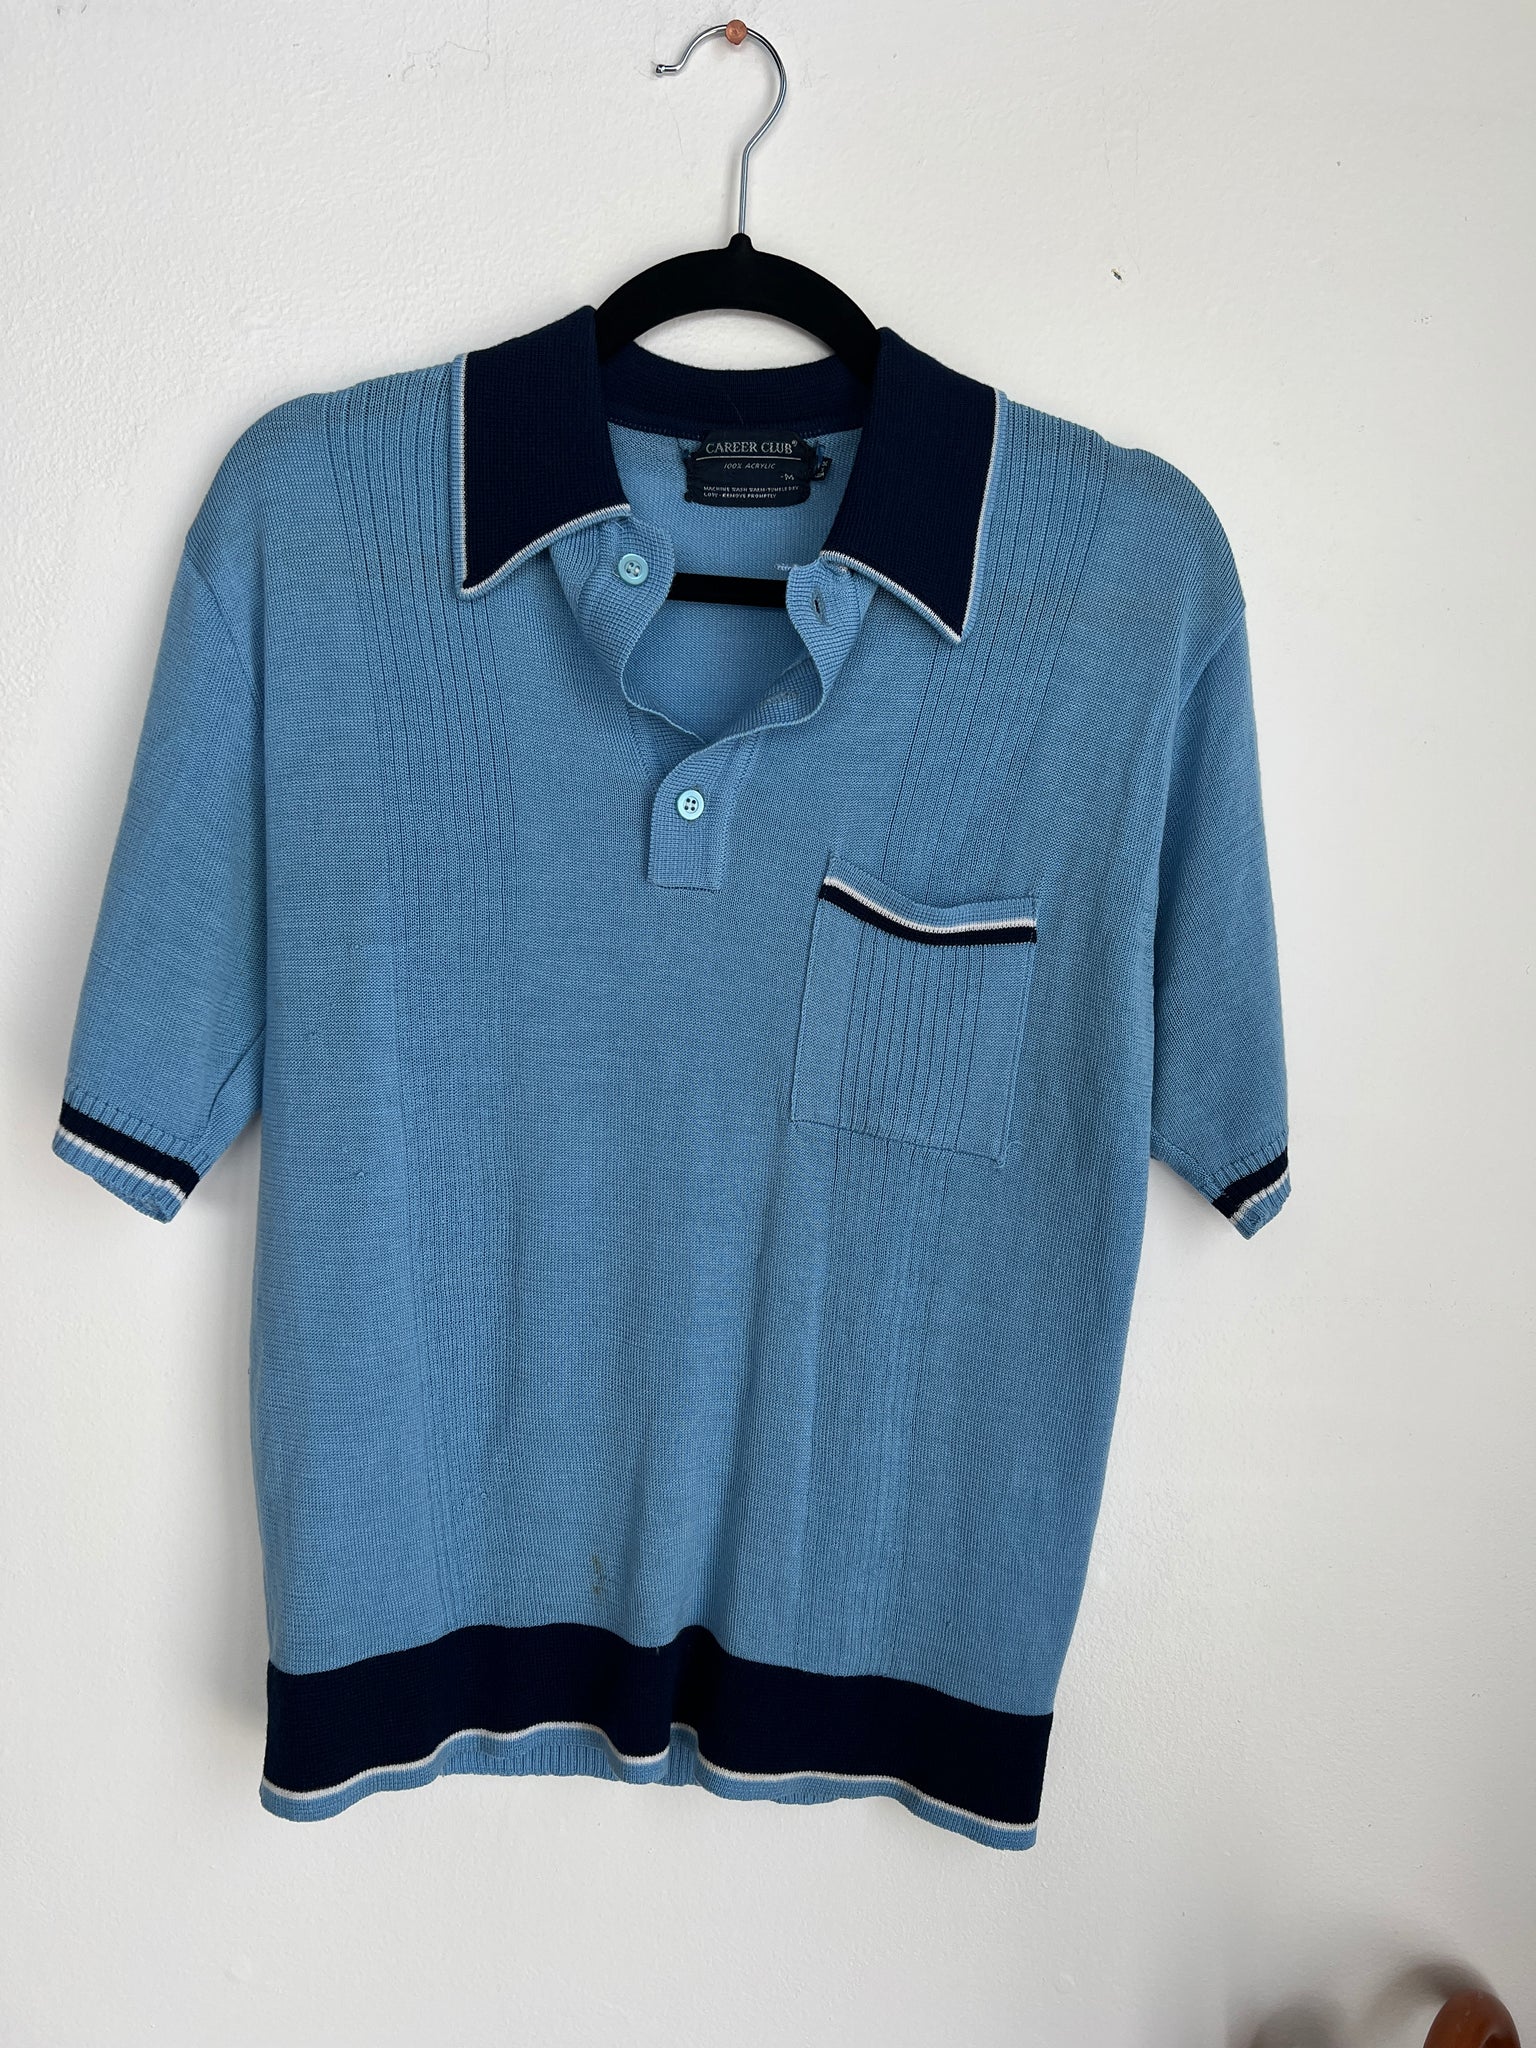 1960s MENS TOP- blue collared s/s knit